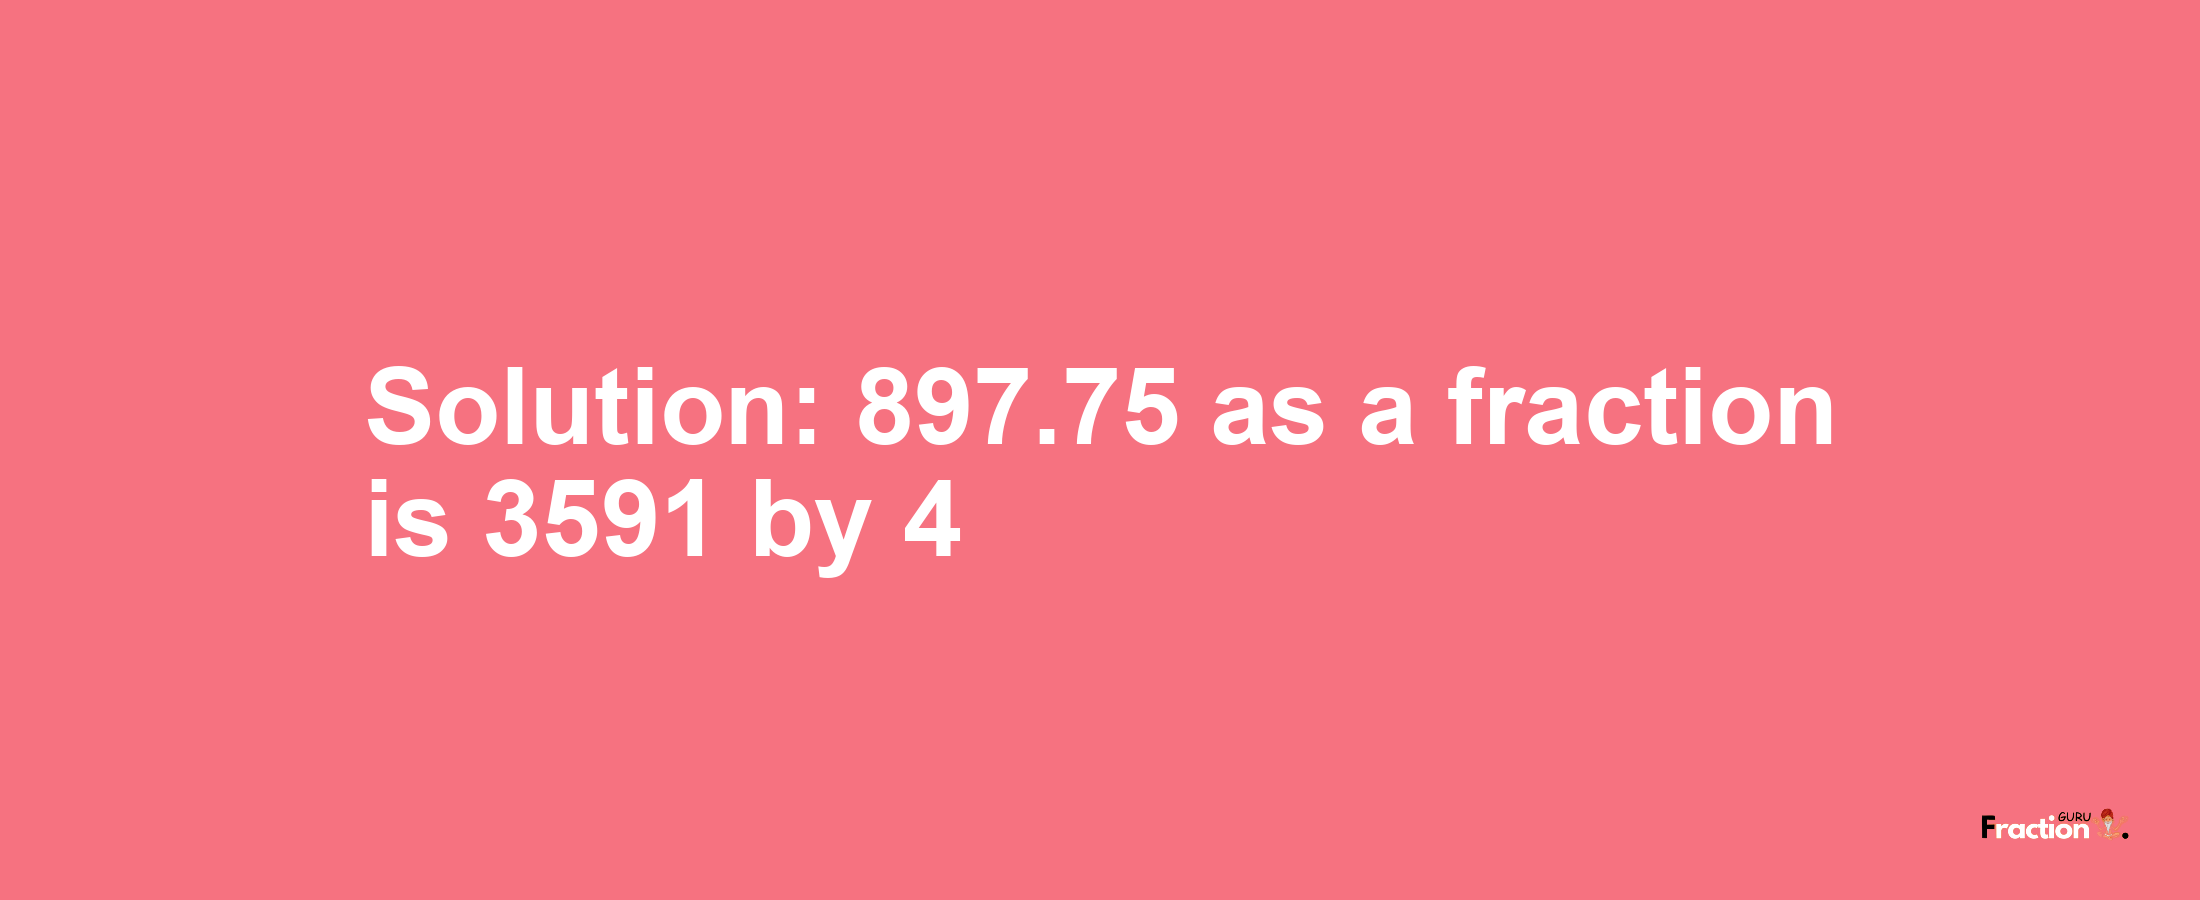 Solution:897.75 as a fraction is 3591/4